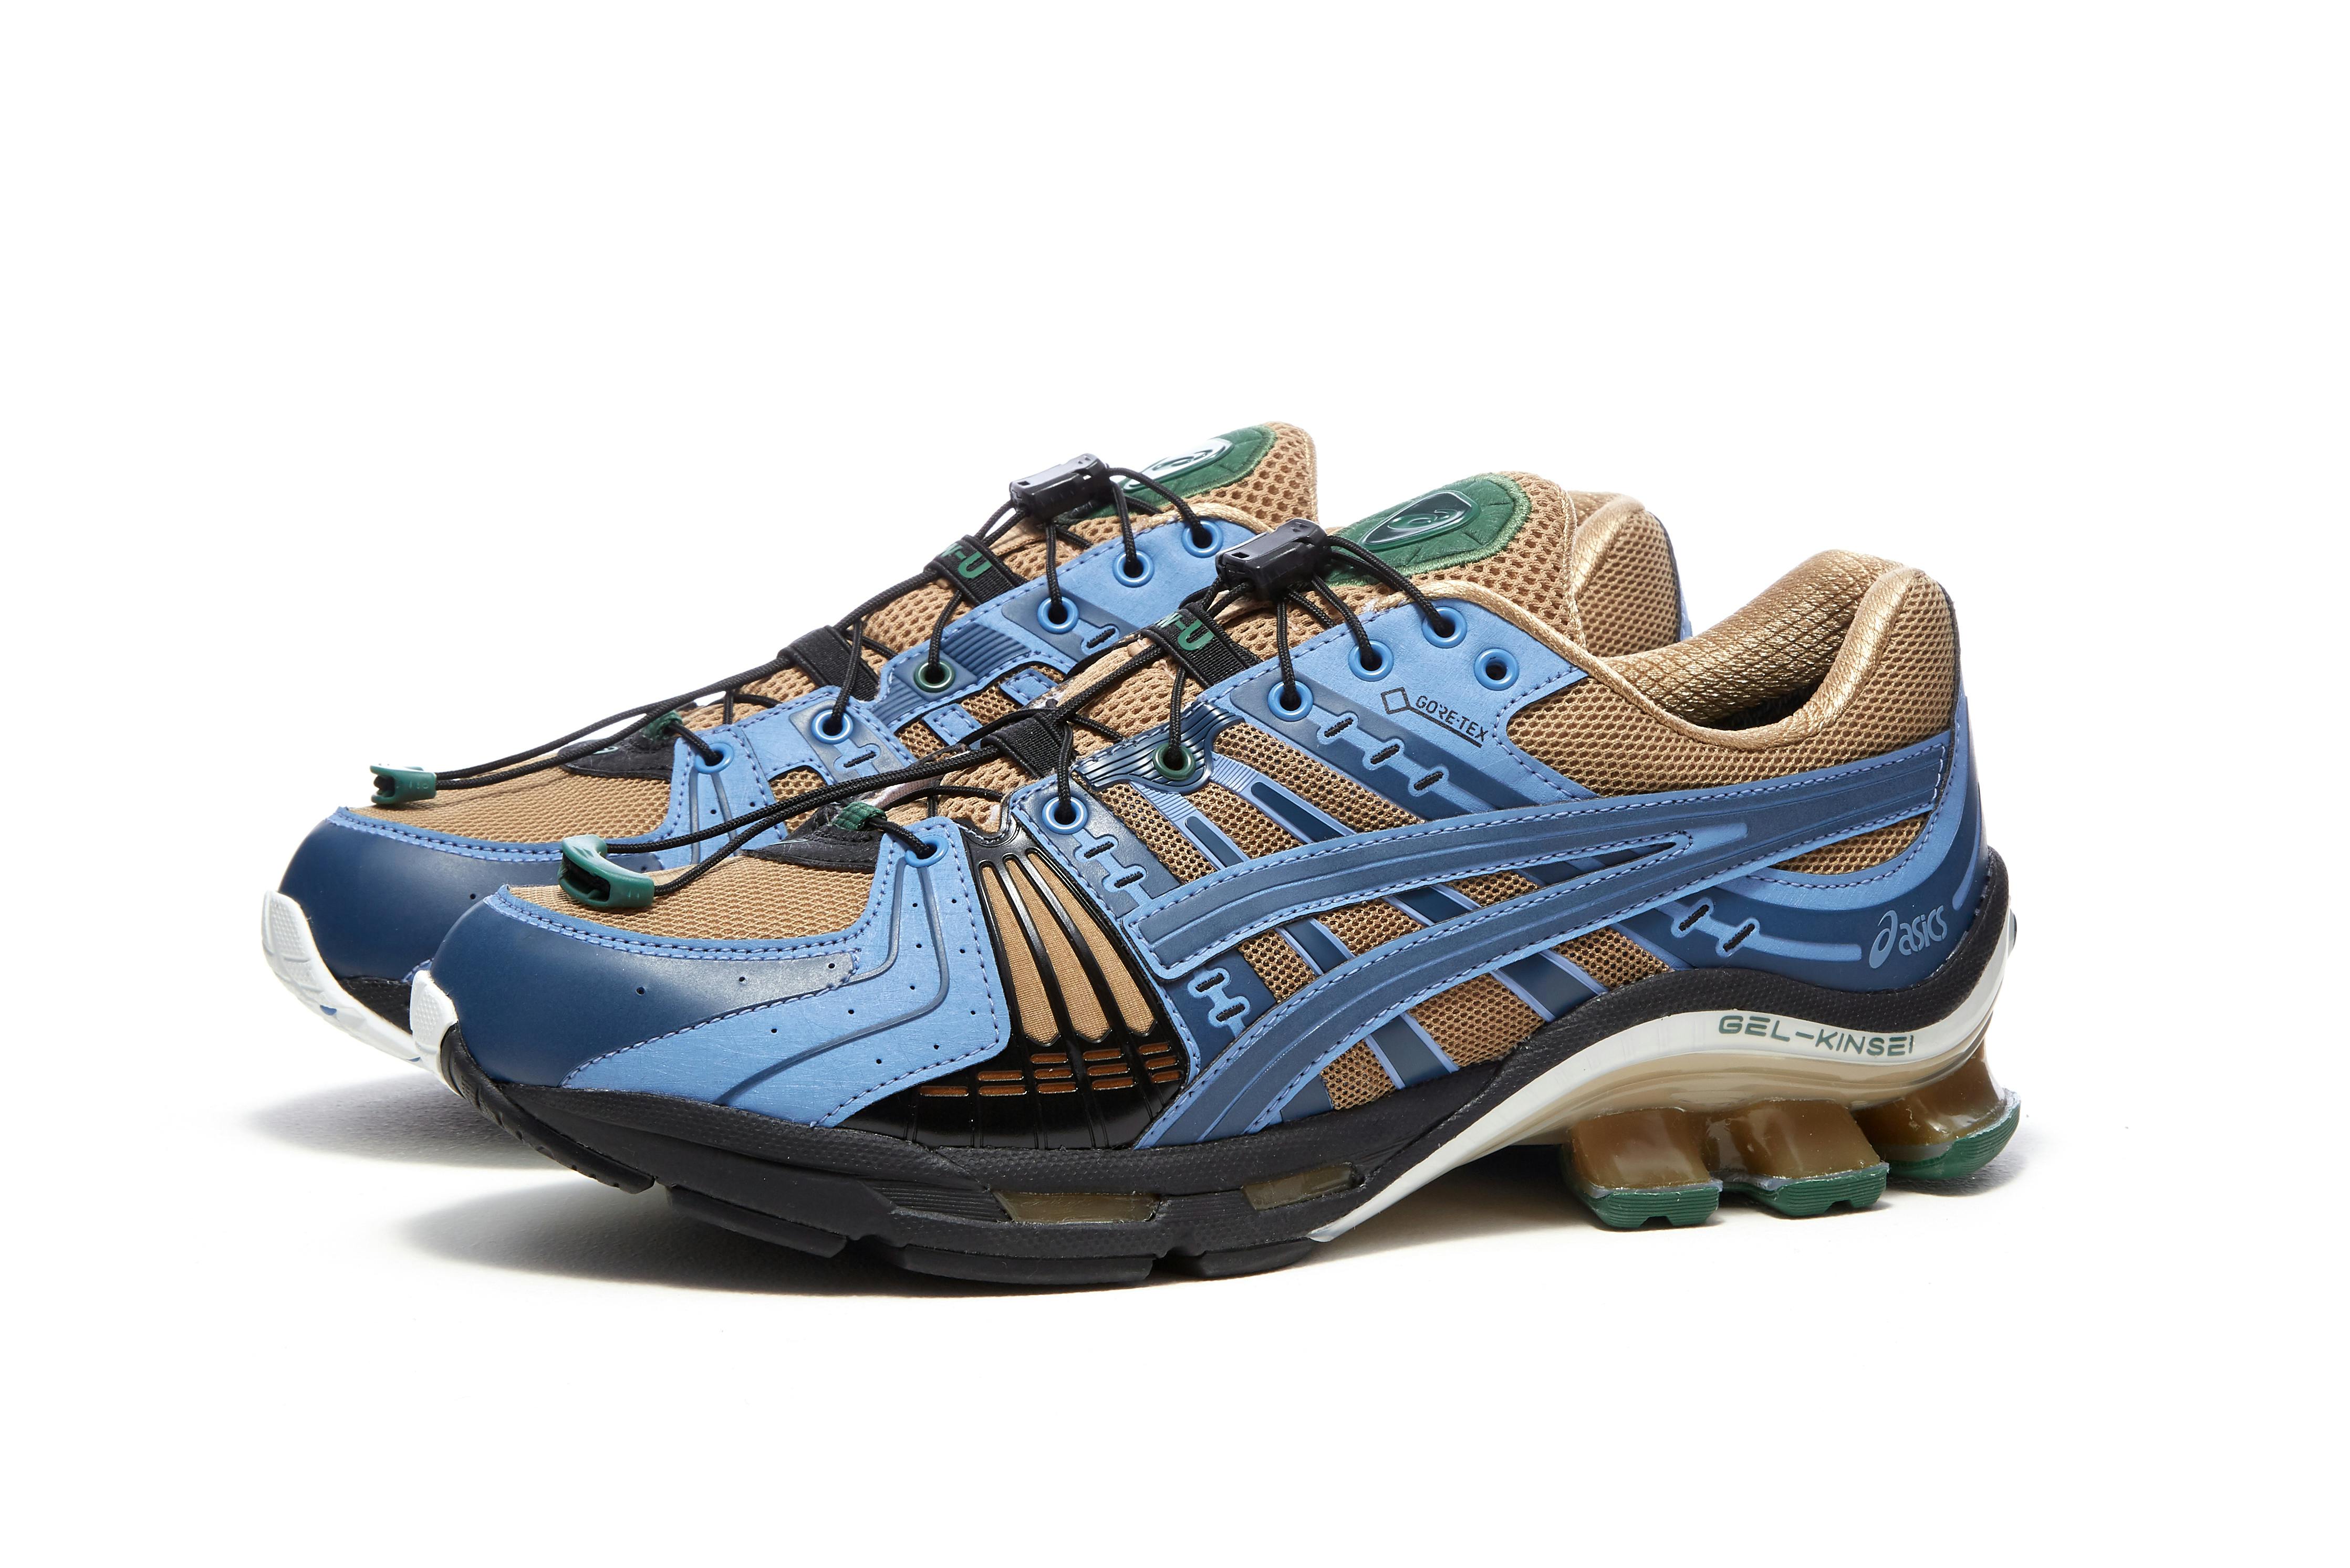 ASICS x Affix Gel Kinsei Gore-Tex - Register Now on END. Launches | END.